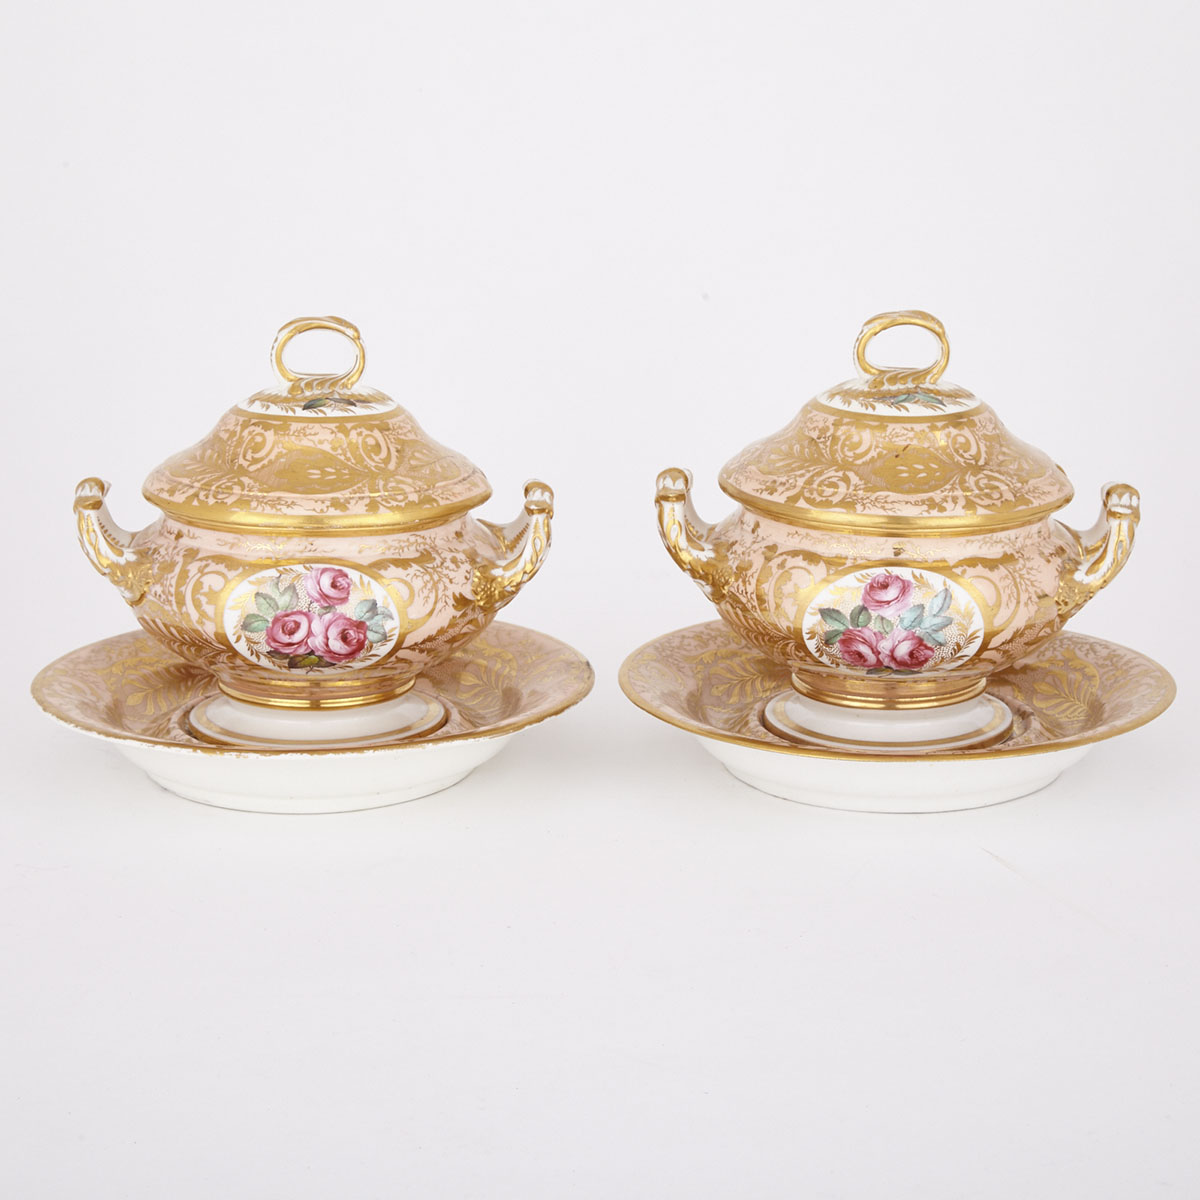 Pair of Derby Apricot and Gilt Ground Covered Sauce Tureens and Stands, c.1810